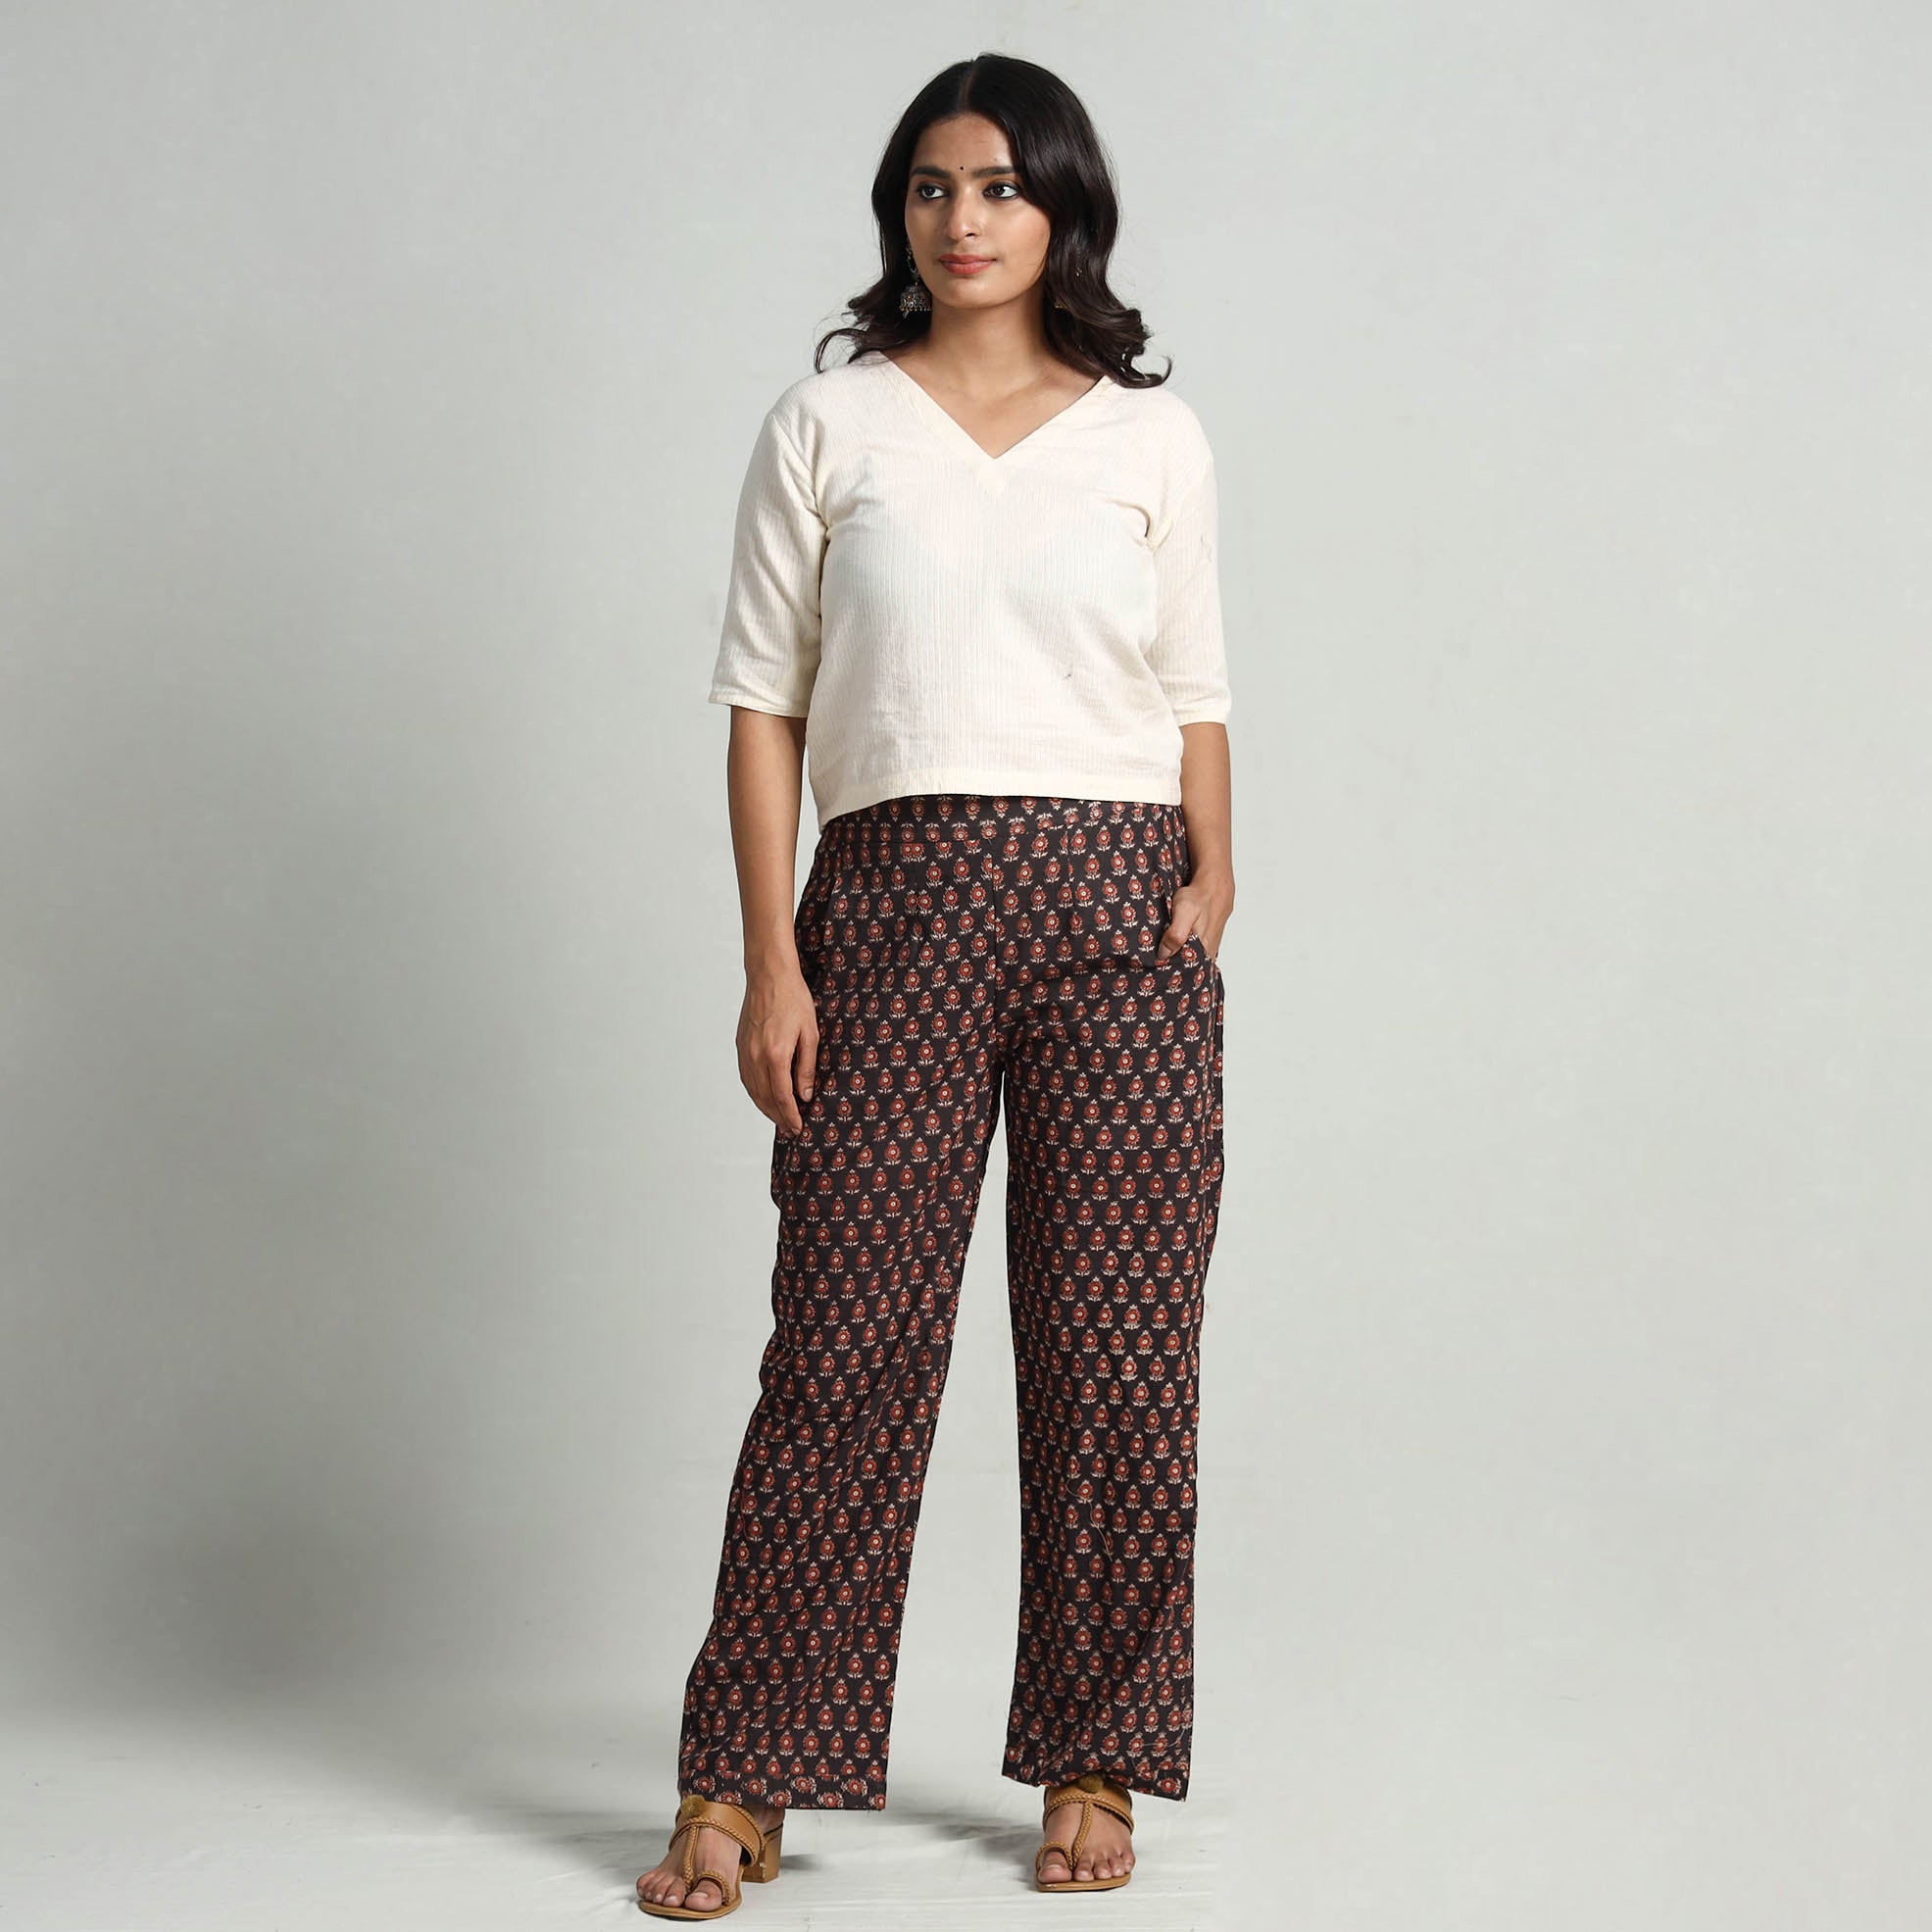 Palazzo Pants In Mumbai, Maharashtra At Best Price | Palazzo Pants  Manufacturers, Suppliers In Bombay